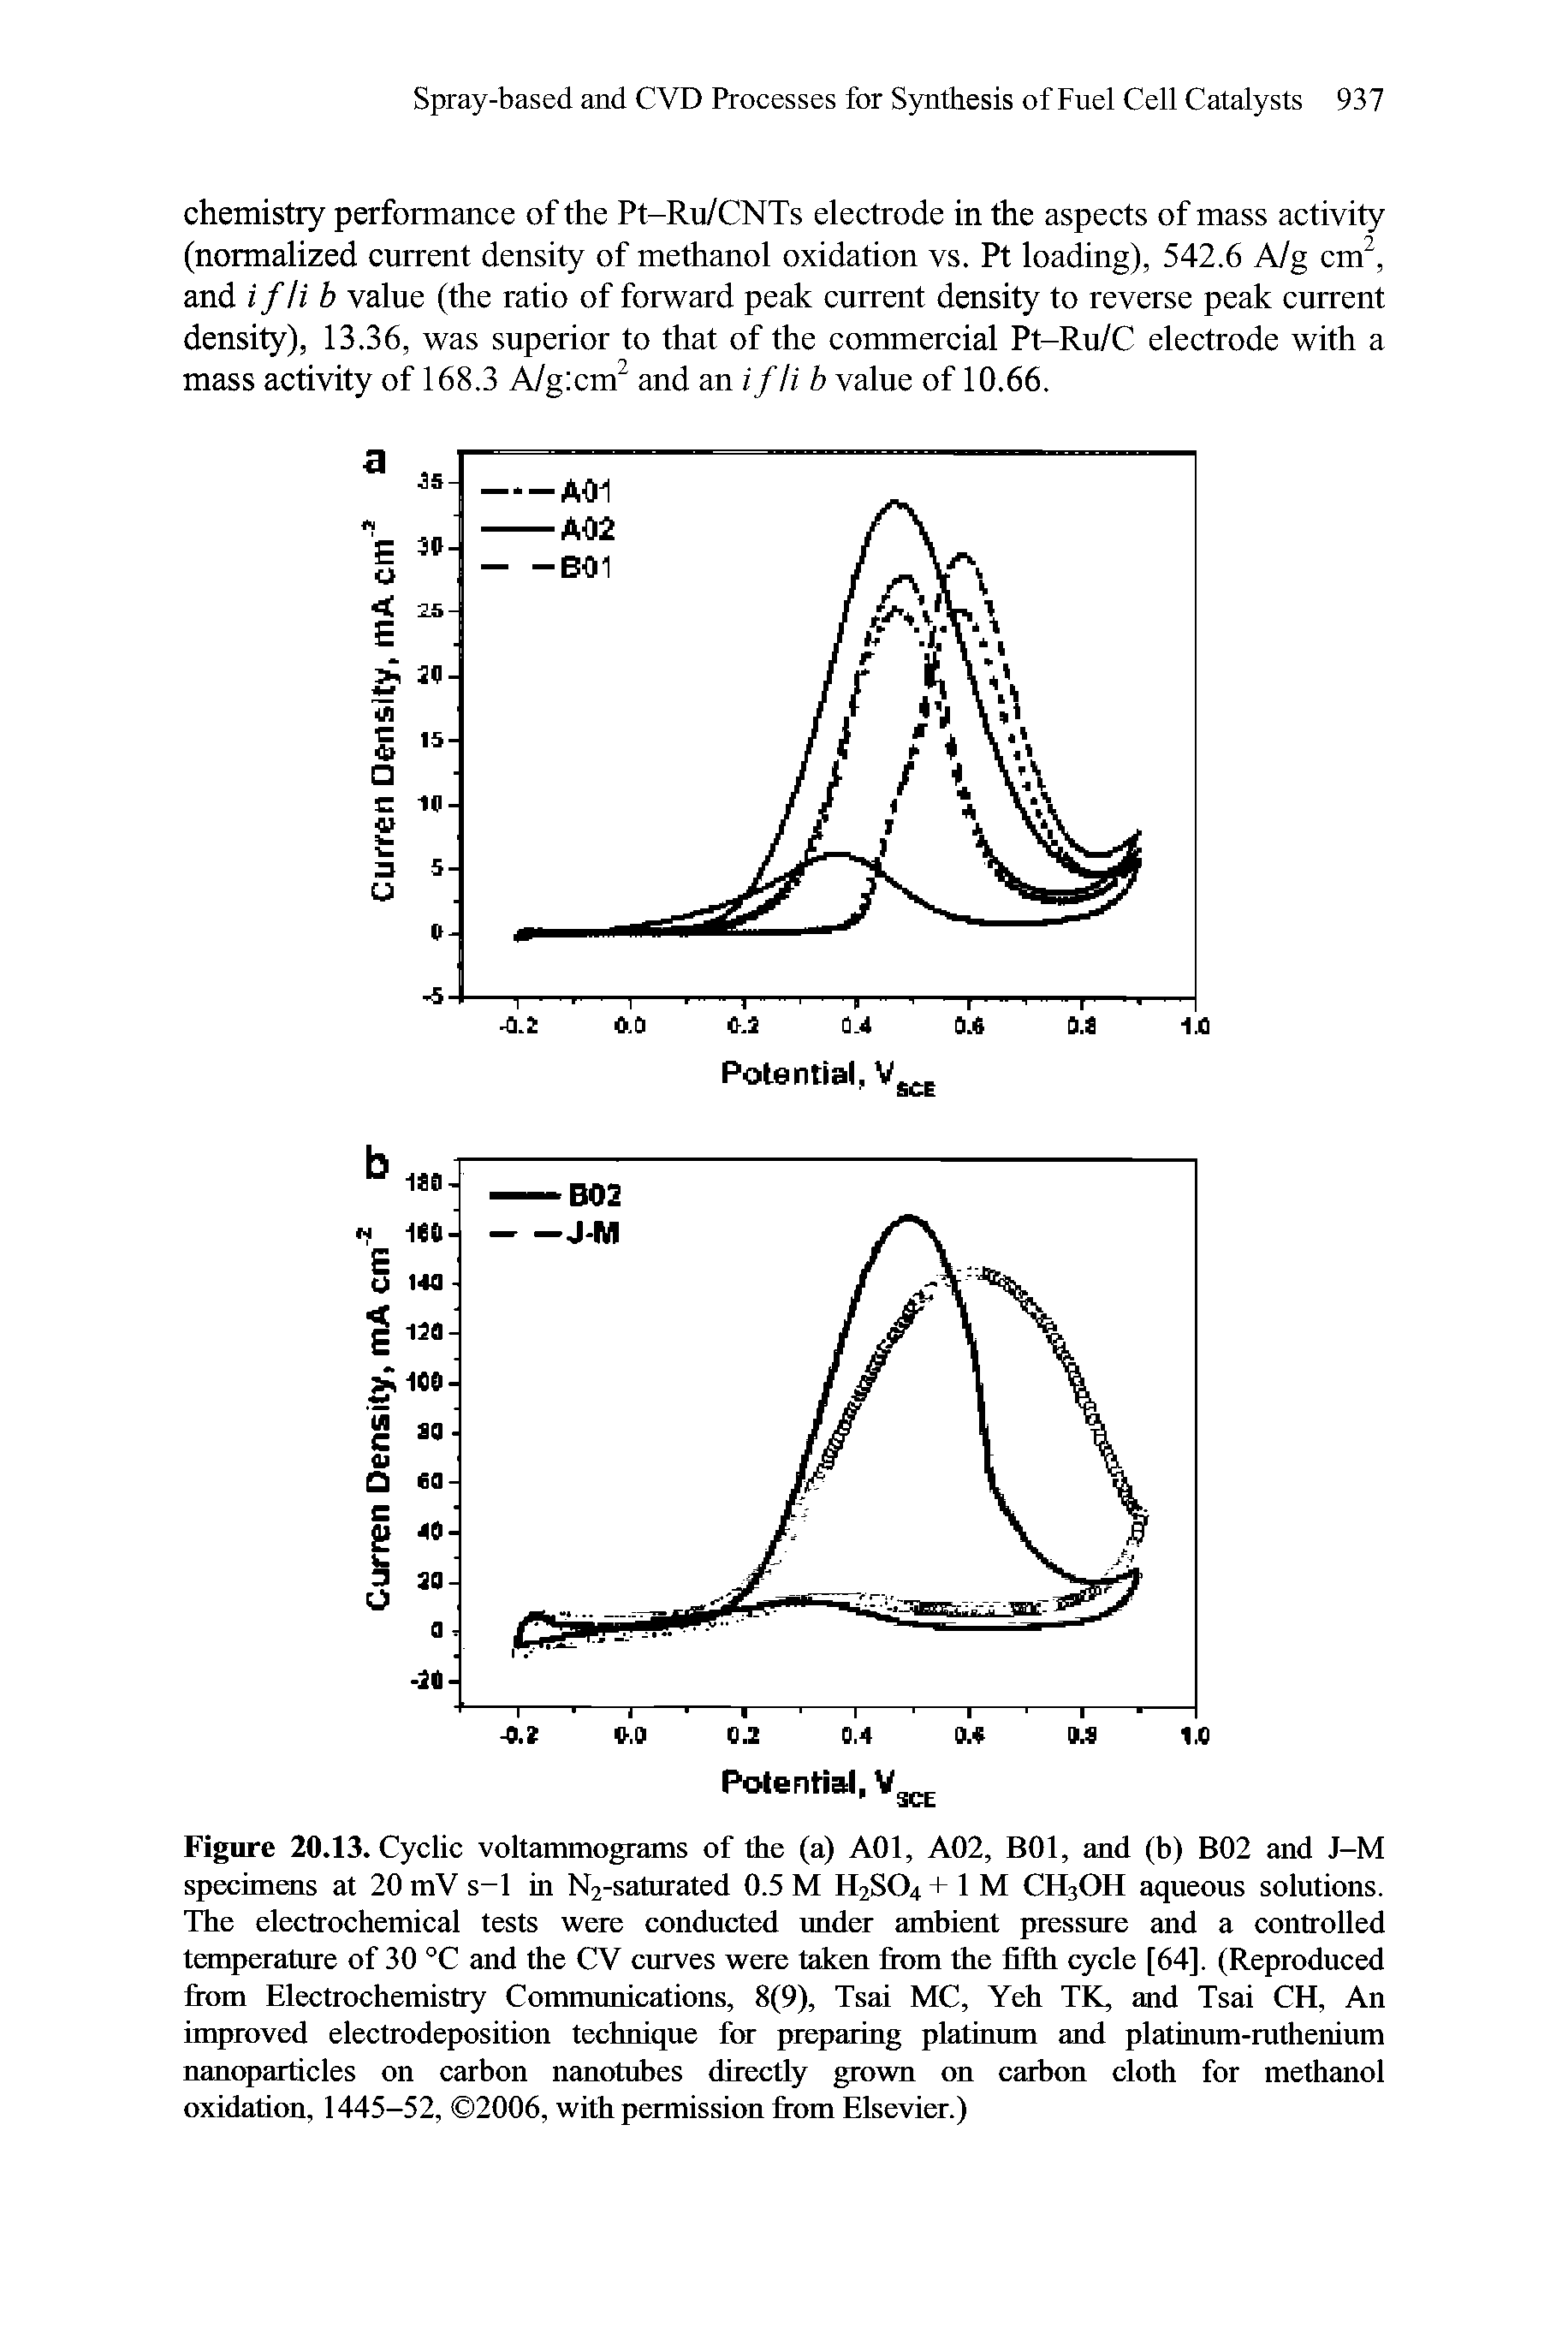 Figure 20.13. Cyclic voltammograms of the (a) AOl, A02, BOl, and (b) B02 and J-M specimens at 20 mV s-1 in N2-saturated 0.5 M H2SO4+ 1 M CH3OH aqueous solutions. The electrochemical tests were conducted under ambient pressure and a controlled temperature of 30 C and the CV curves were taken from the fifth cycle [64]. (Reproduced from Electrochemistry Communications, 8(9), Tsai MC, Yeh TK, and Tsai CH, An improved electrodeposition technique for preparing platinum and platinum-ruthenium nanoparticles on carbon nanotubes directly grown on carbon cloth for methanol oxidation, 1445-52, 2006, with permission from Elsevier.)...